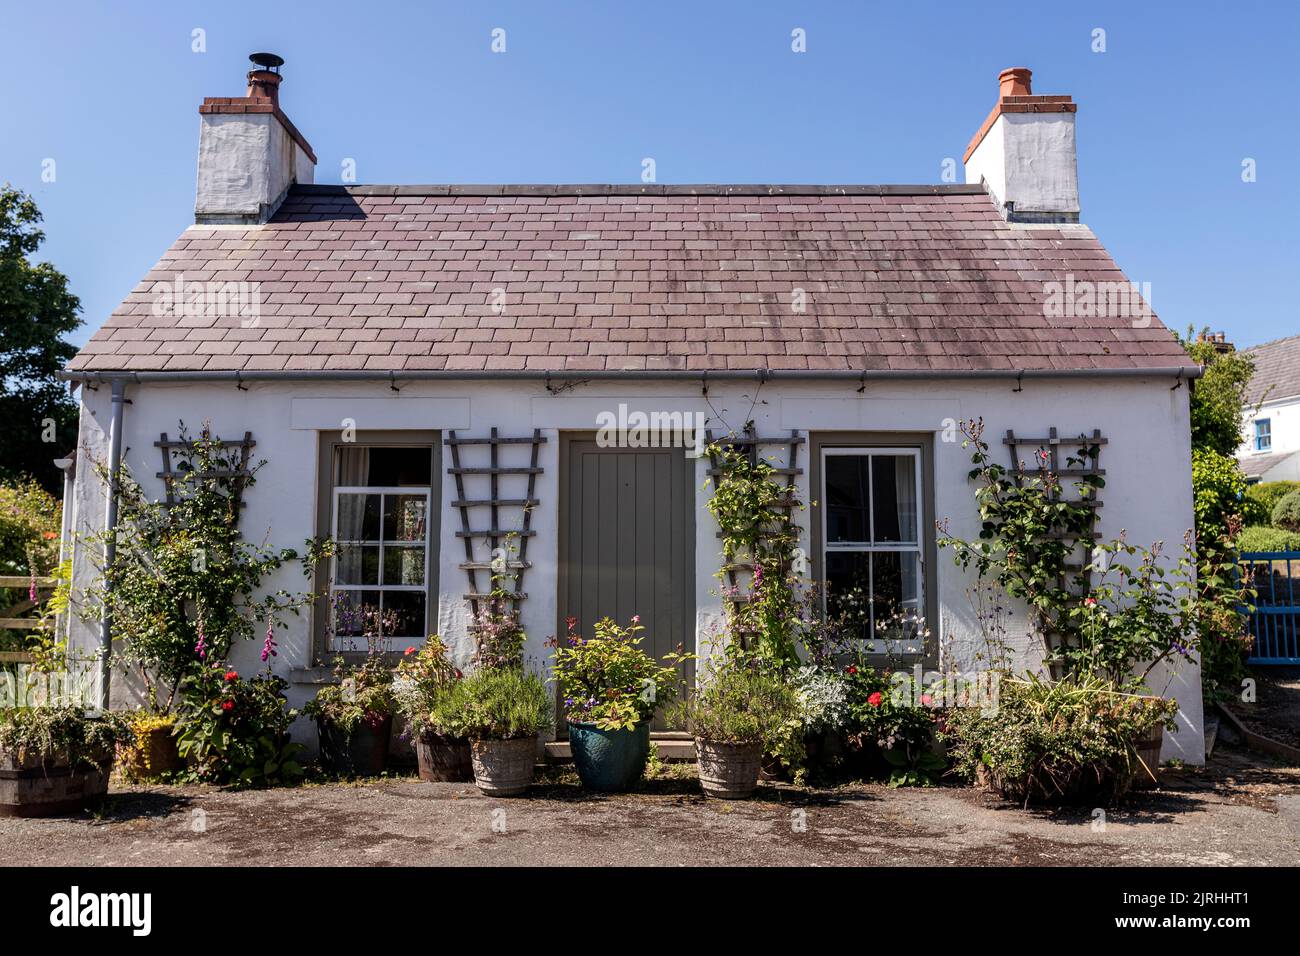 Village cottage house in Marloes, Pembrokeshire, Wales, UK Stock Photo